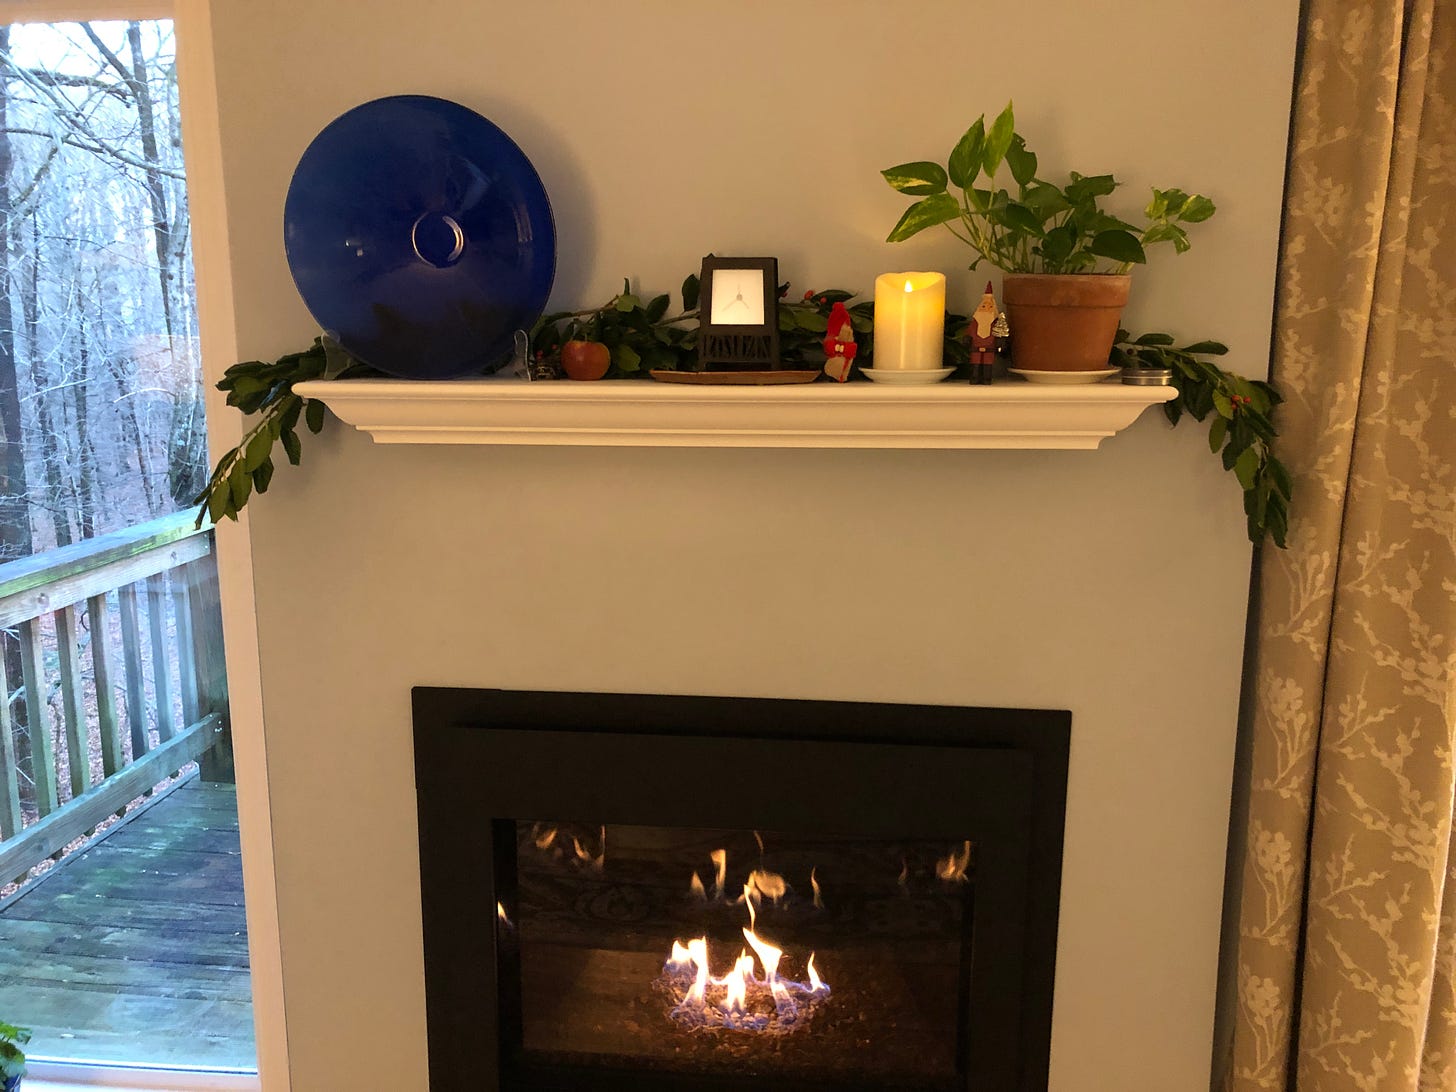 My fireplace mantel, literally decked with holly and Julenisse